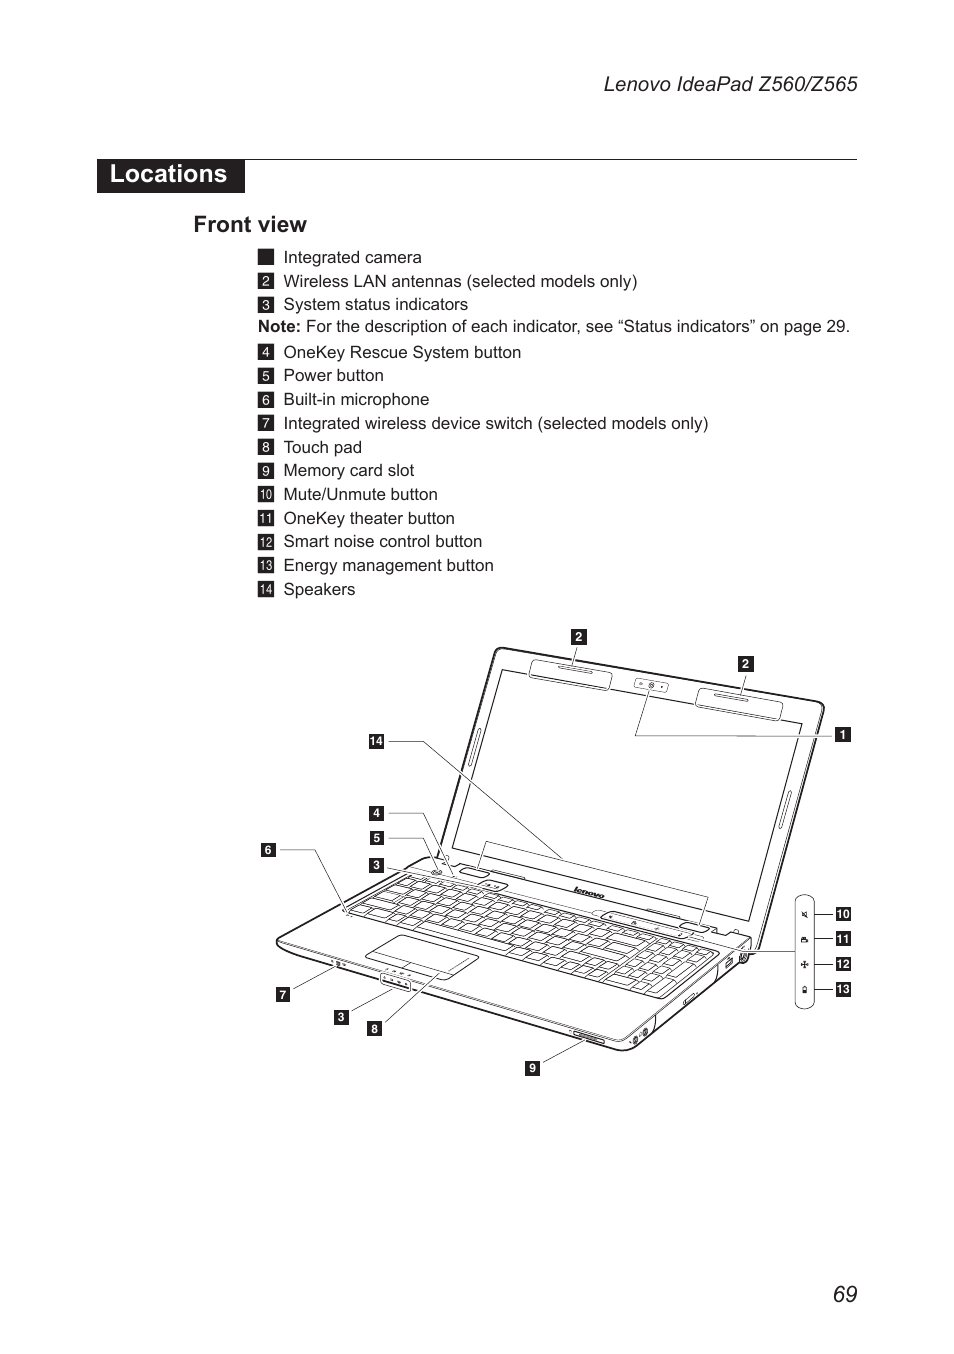 Locations, Front view | Lenovo IdeaPad Z560 User Manual | Page 73 / 90 |  Original mode